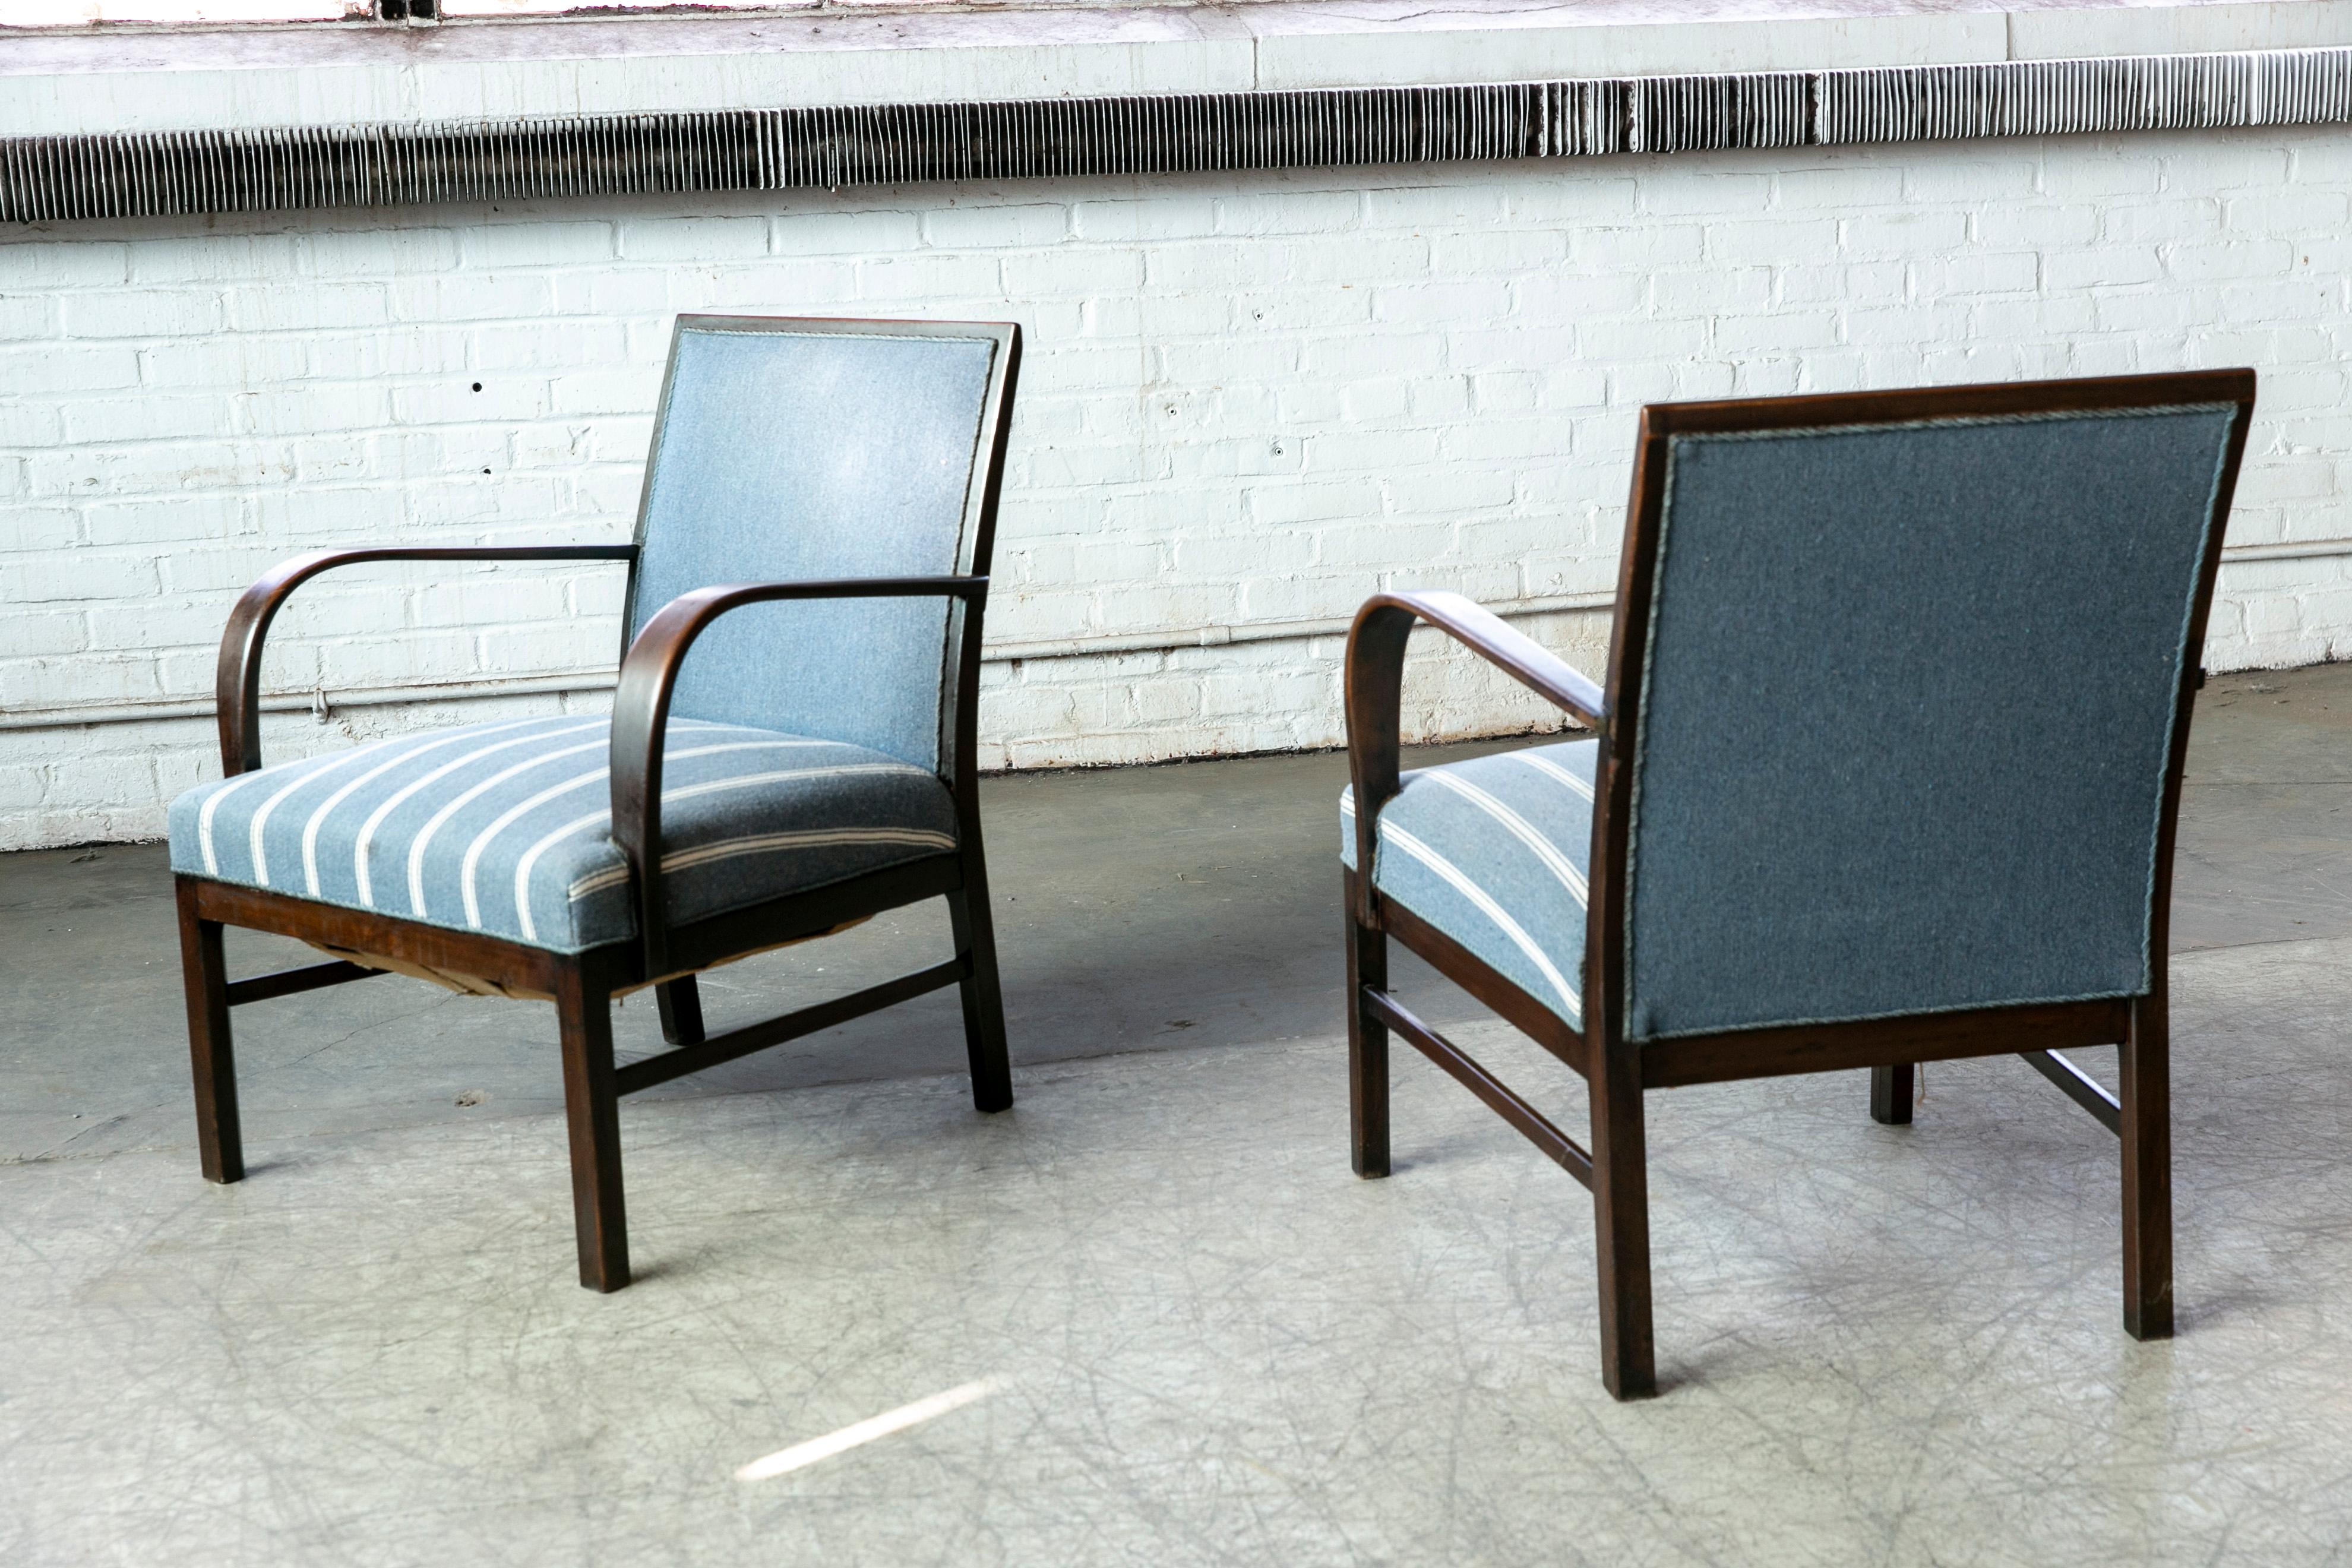 Pair of Danish Early Midcentury or Art Deco Low Lounge Chairs Mahagony, 1940's For Sale 2